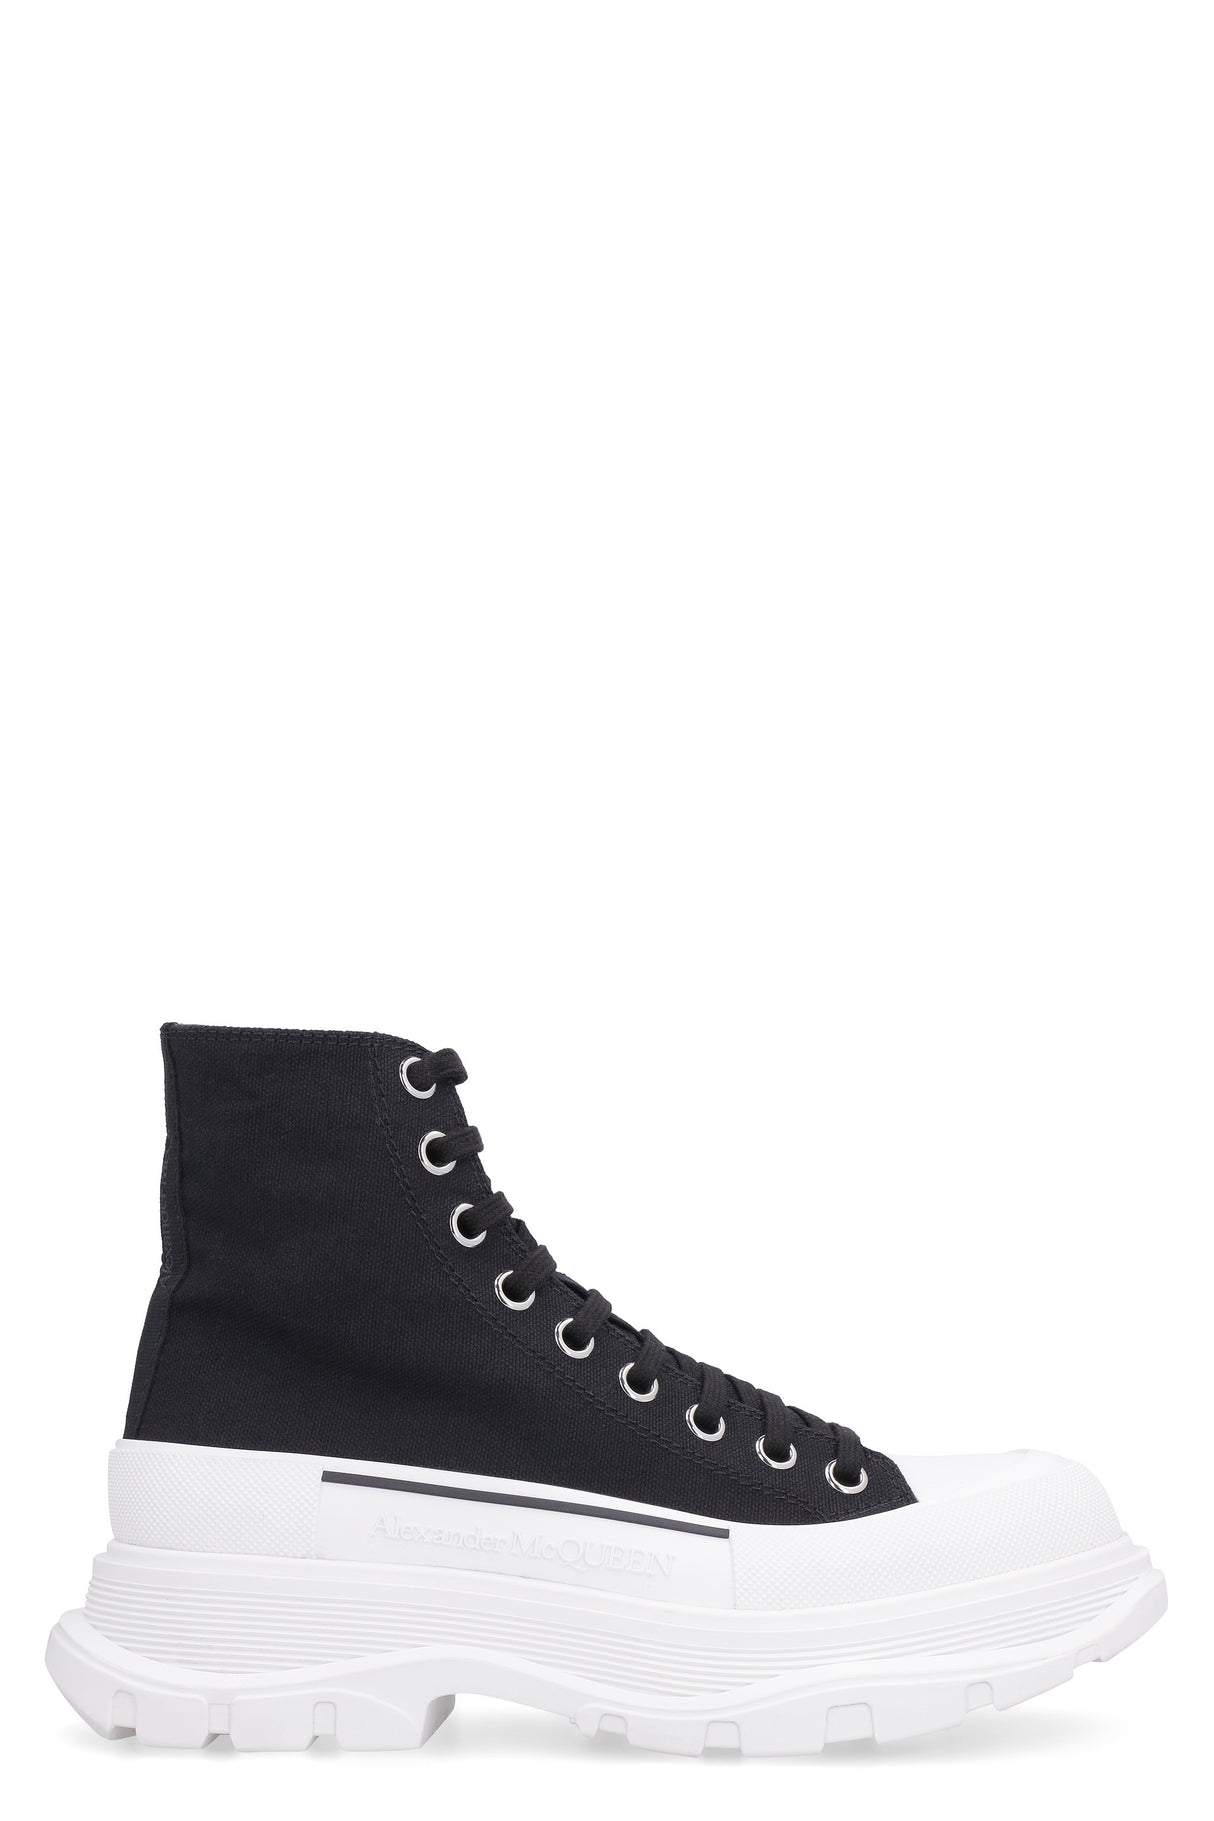 Canvas Ankle Boots for Men with Textured Rubber and Branded Tape by Alexander McQueen